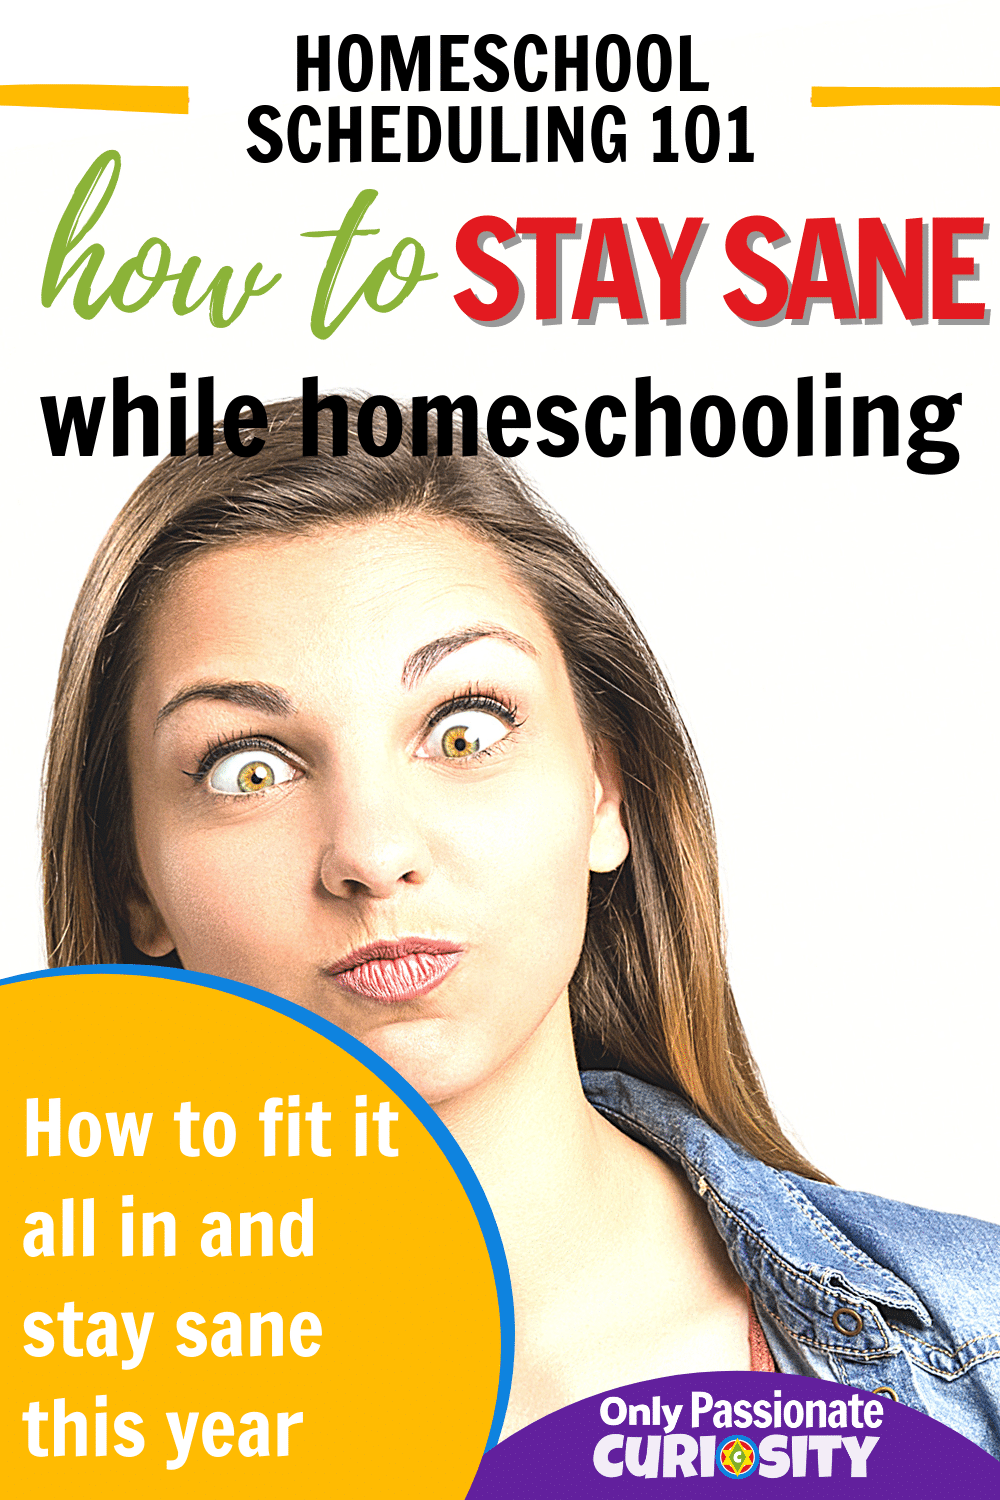 All of us have a lot to do and a lot going on--which leads me to Homeschool Scheduling 101 topic. Here are tips to stay sane while homeschooling. #Homeschool #HomeschoolTips #Scheduling